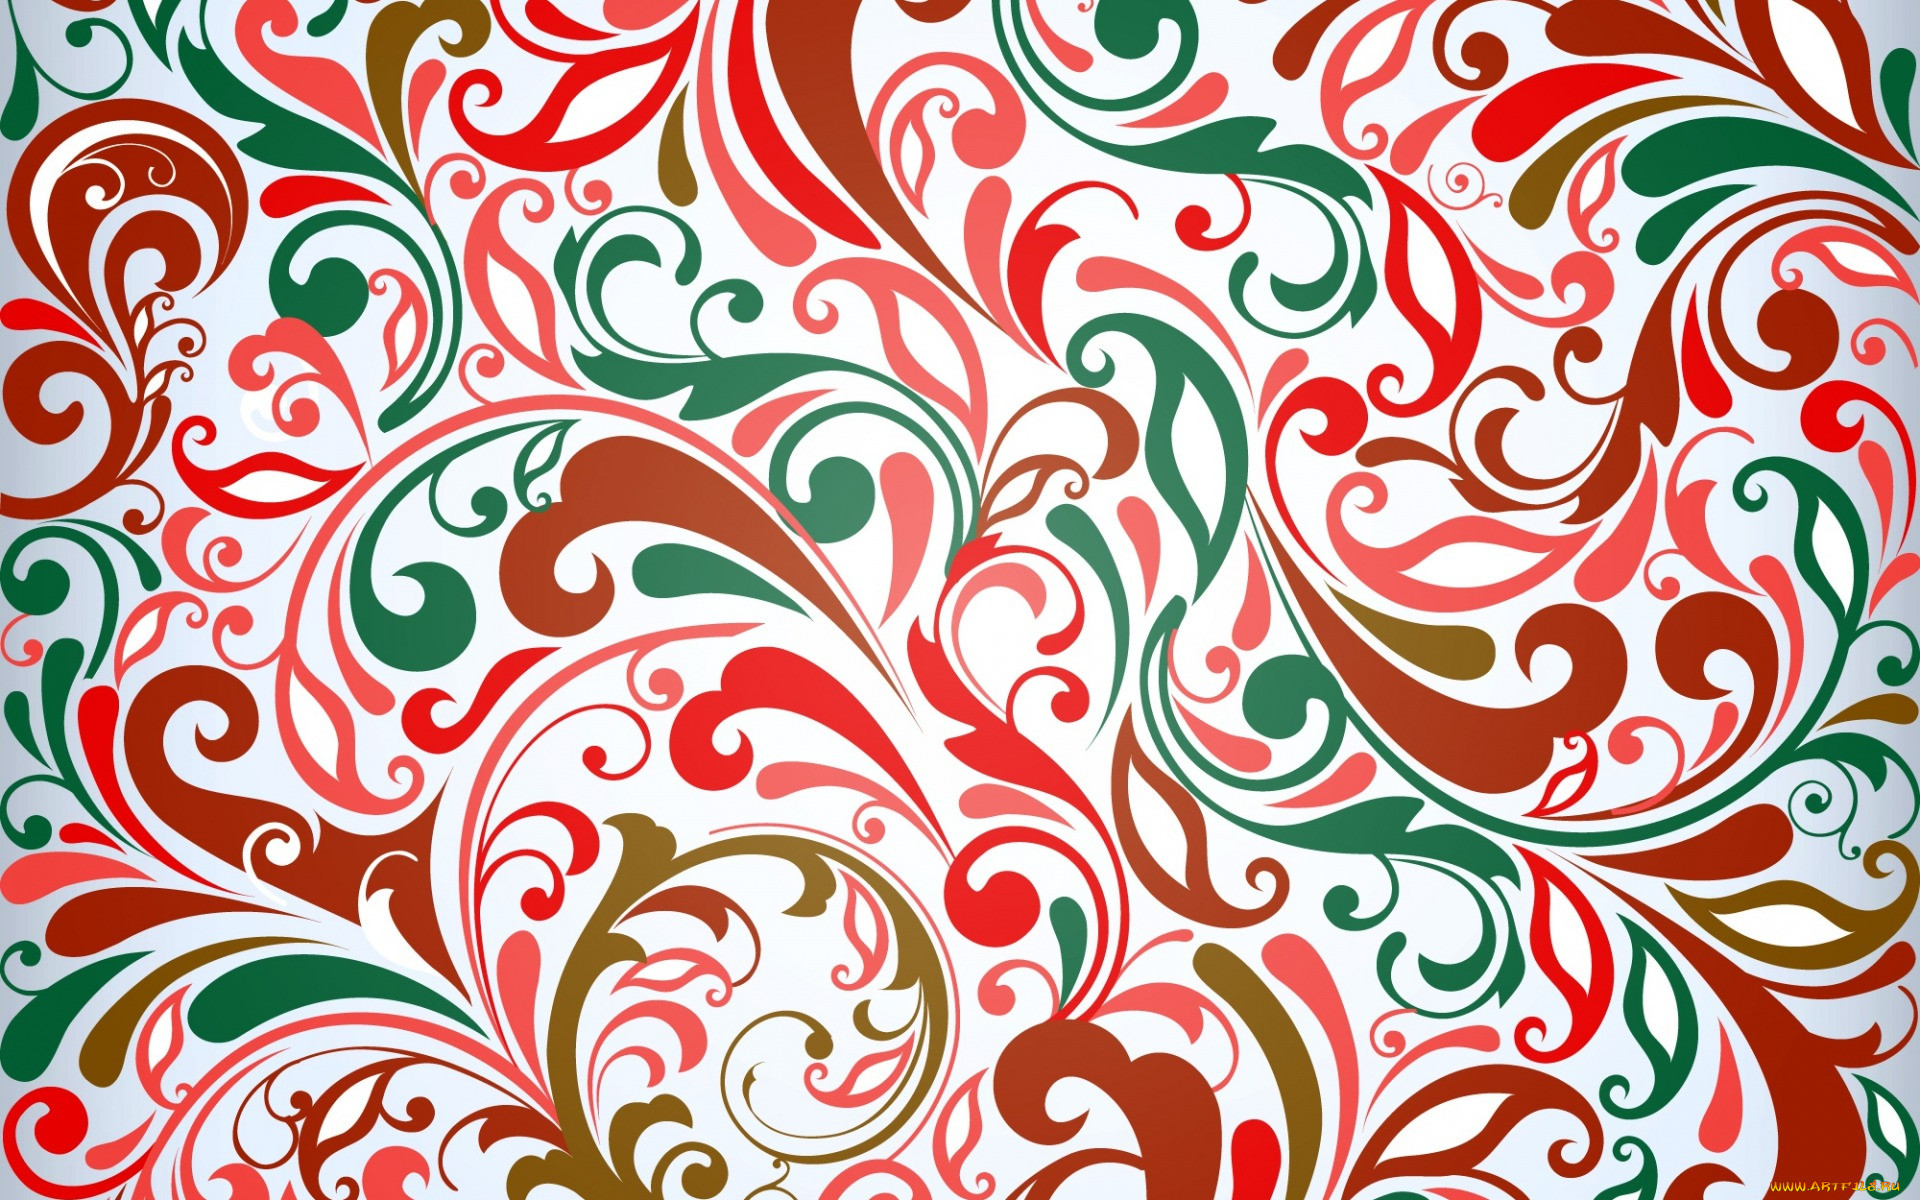  ,  , graphics, pattern, background, abstract, colorful, design